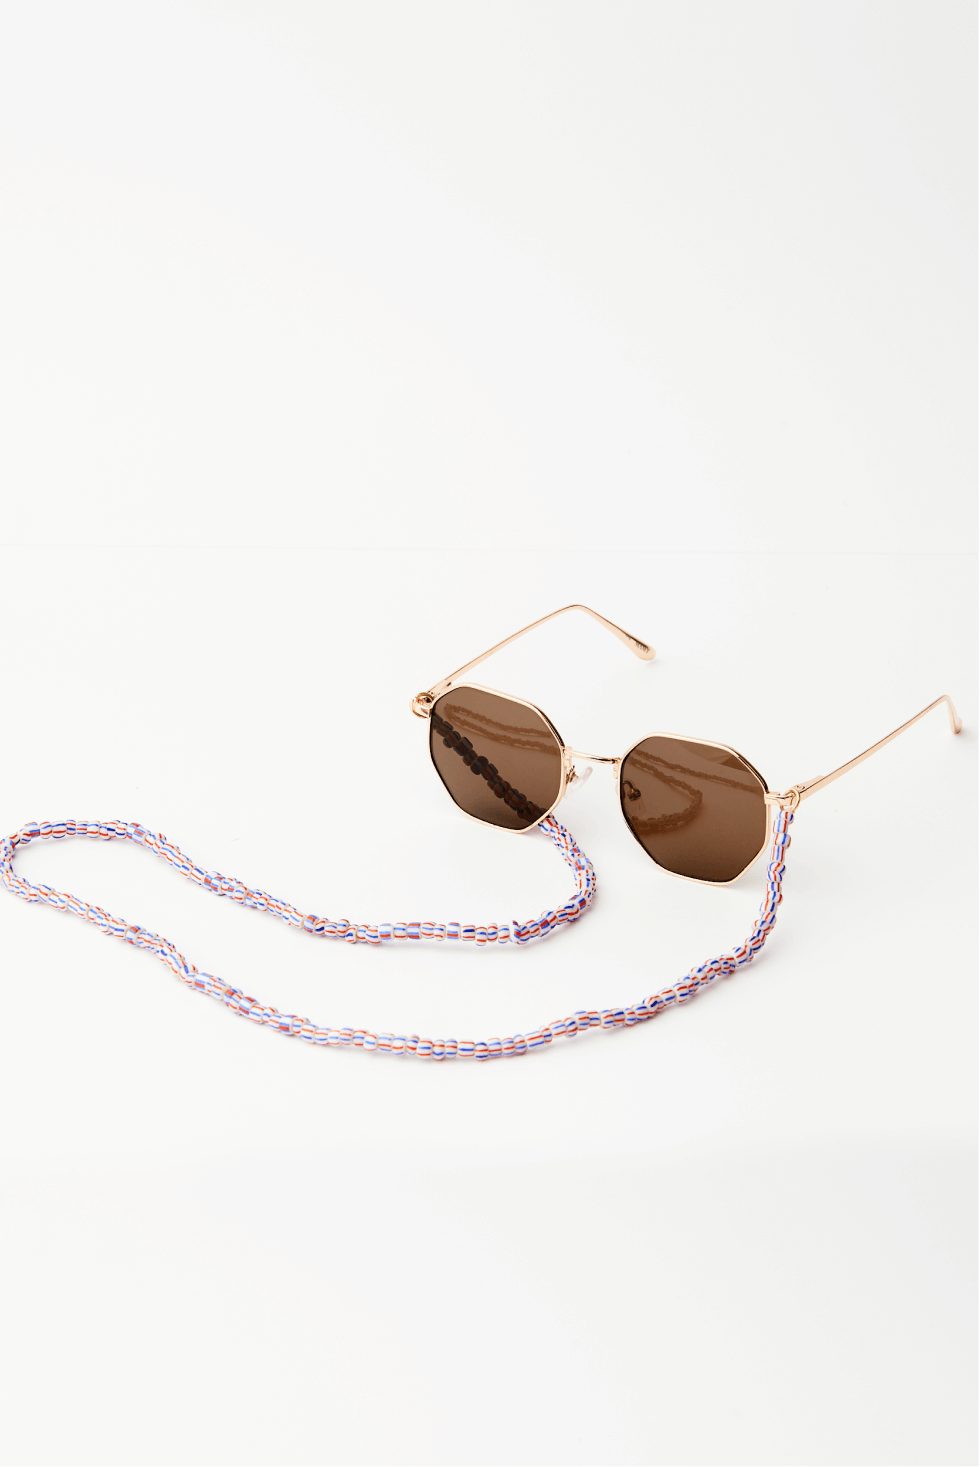 Shop The Katia Sunglasses Cord by Soluna Collections on Arrai. Discover stylish, affordable clothing, jewelry, handbags and unique handmade pieces from top Kenyan & African fashion brands prioritising sustainability and quality craftsmanship.